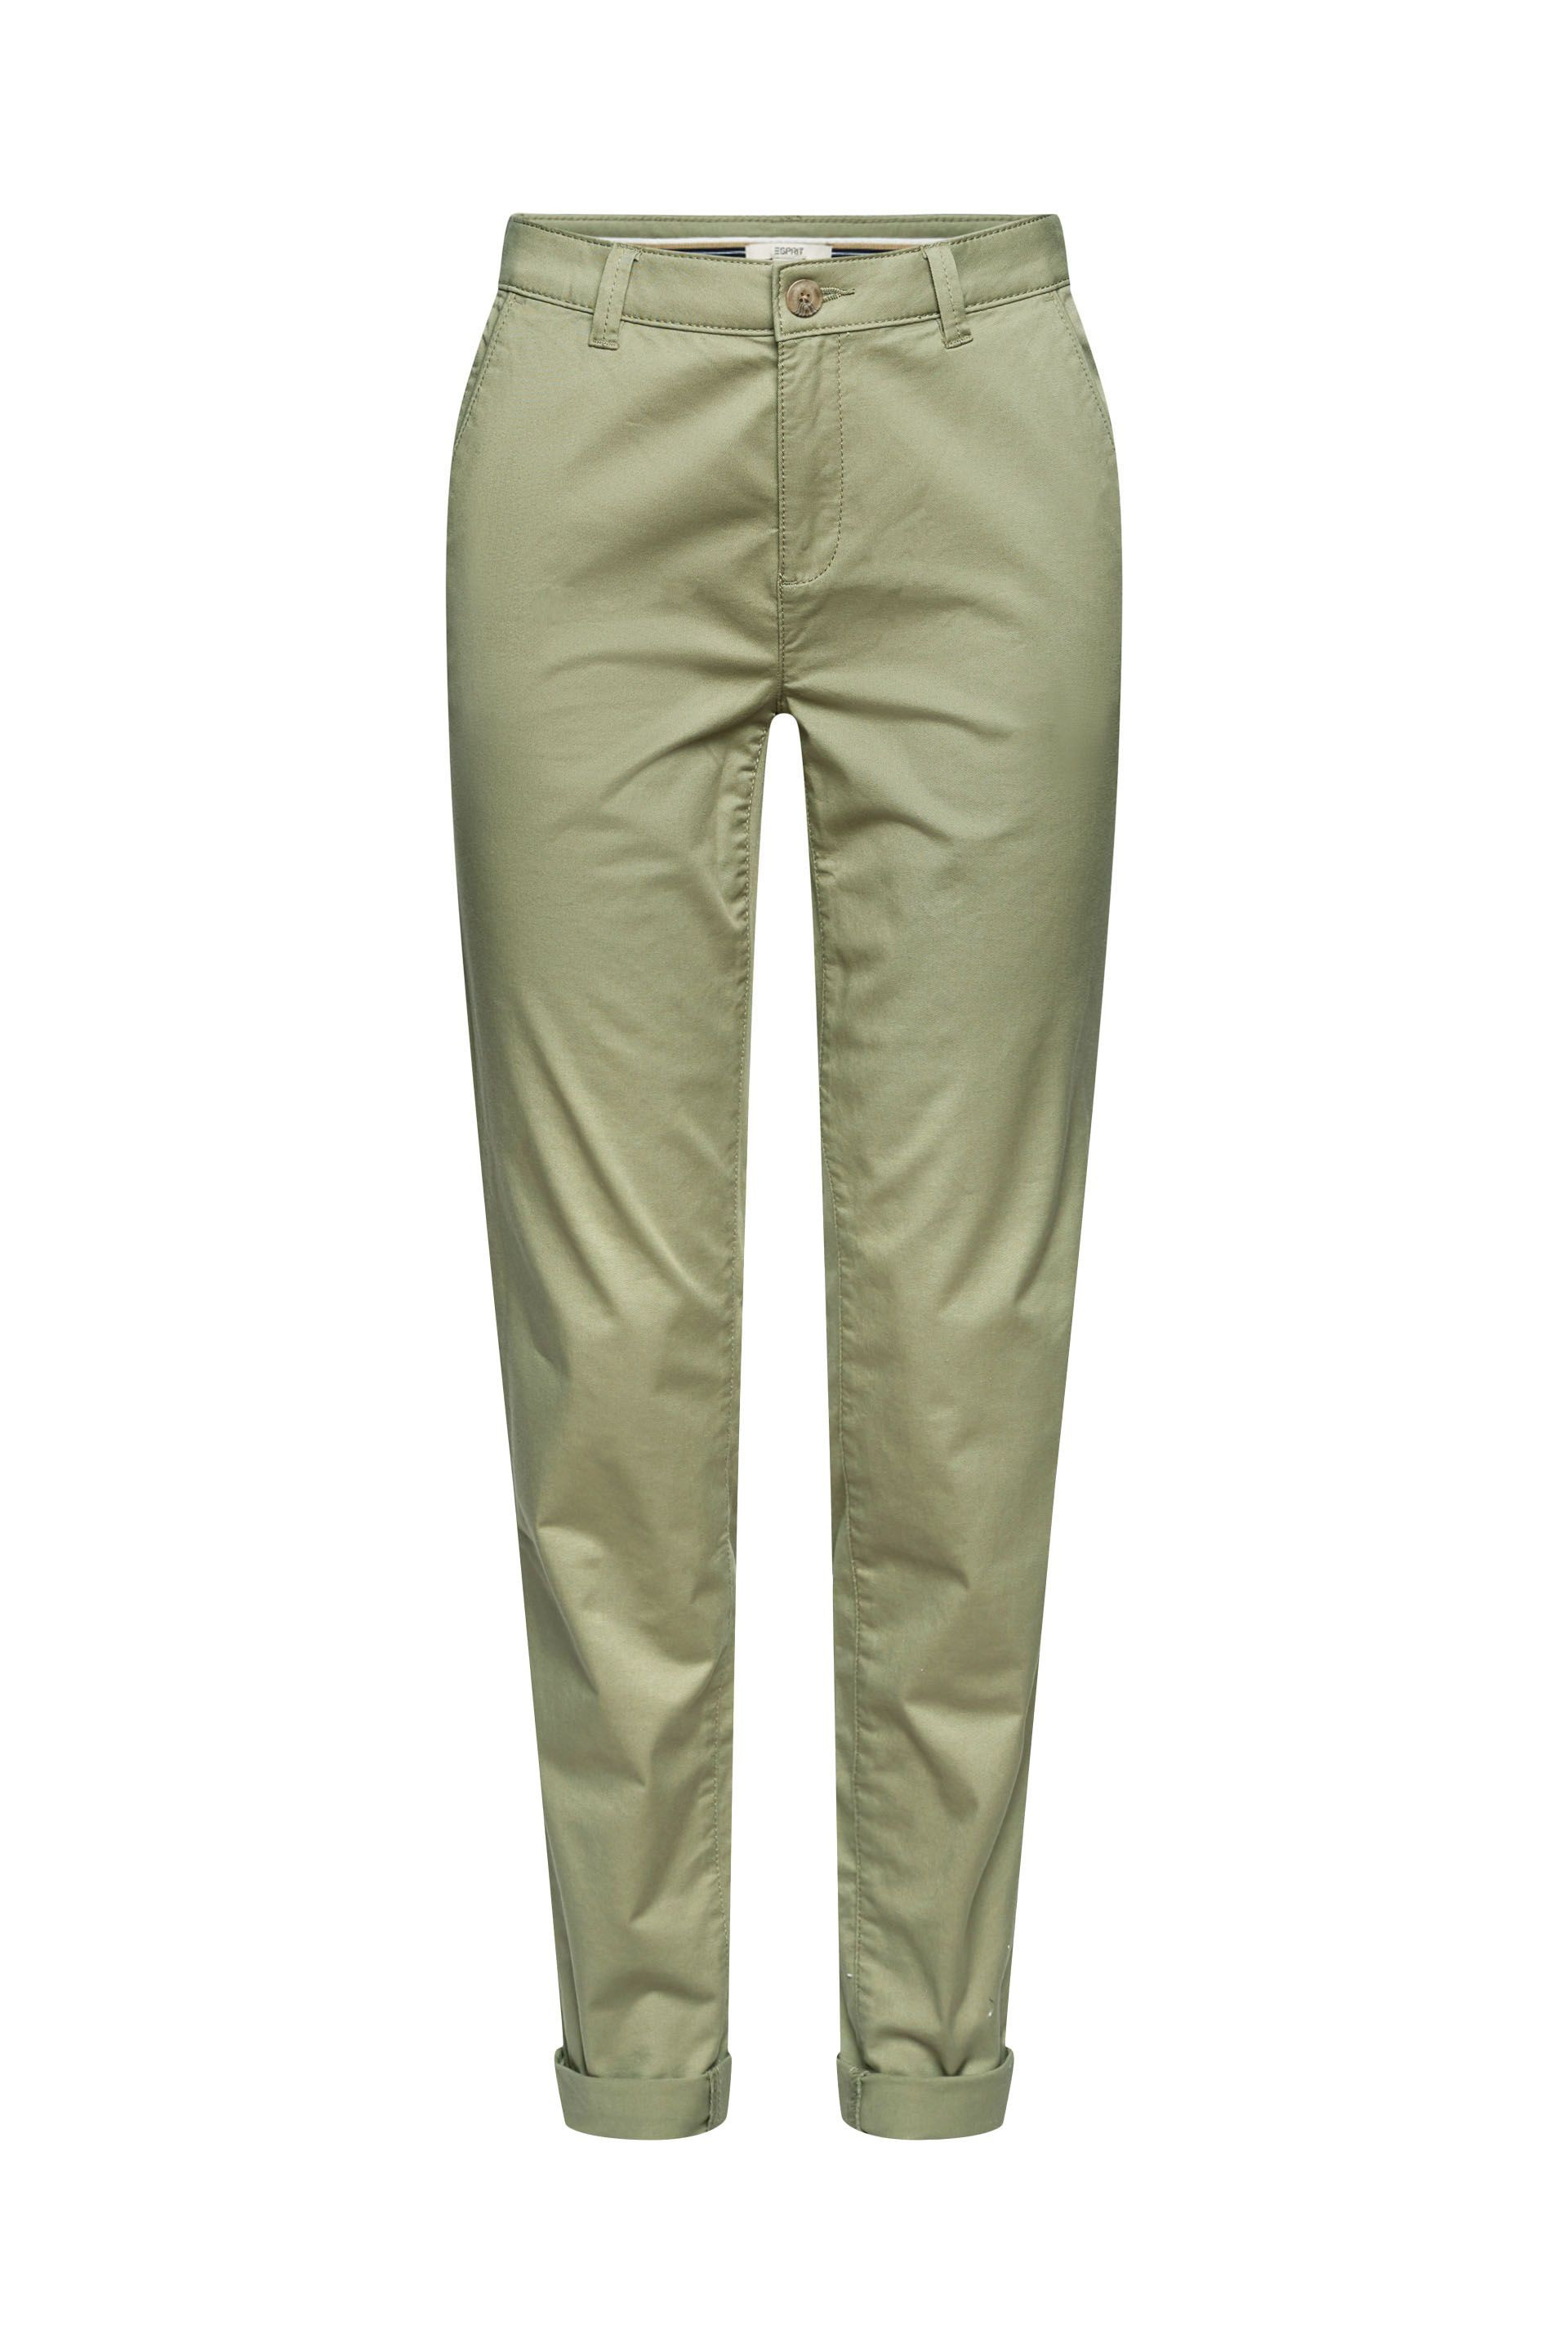 Stretch chino trousers, Light Green, large image number 0